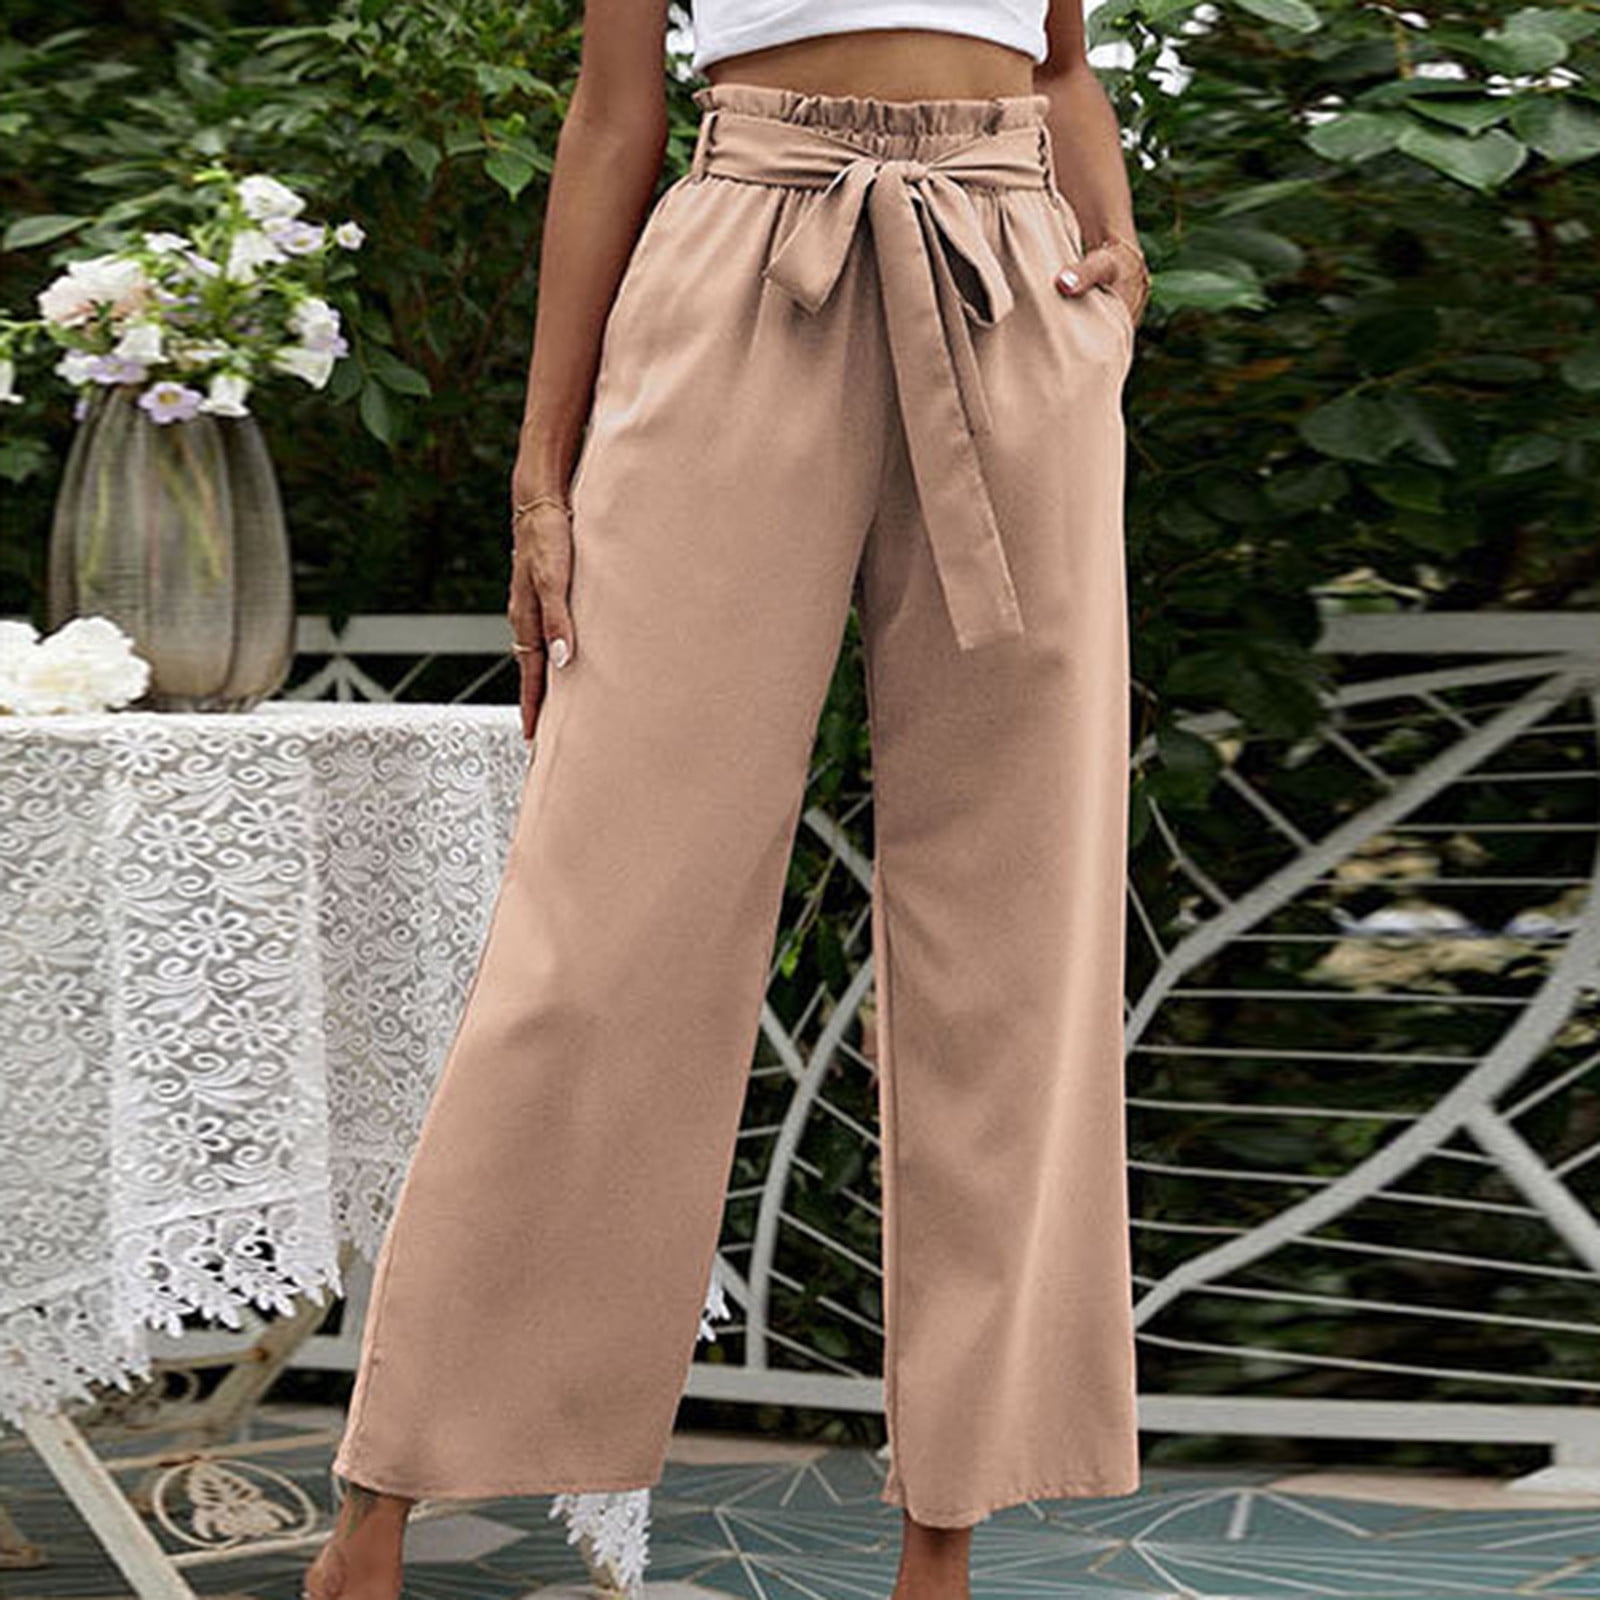 Loose pants for women: Revamp Your Wardrobe with Comfortable缩略图